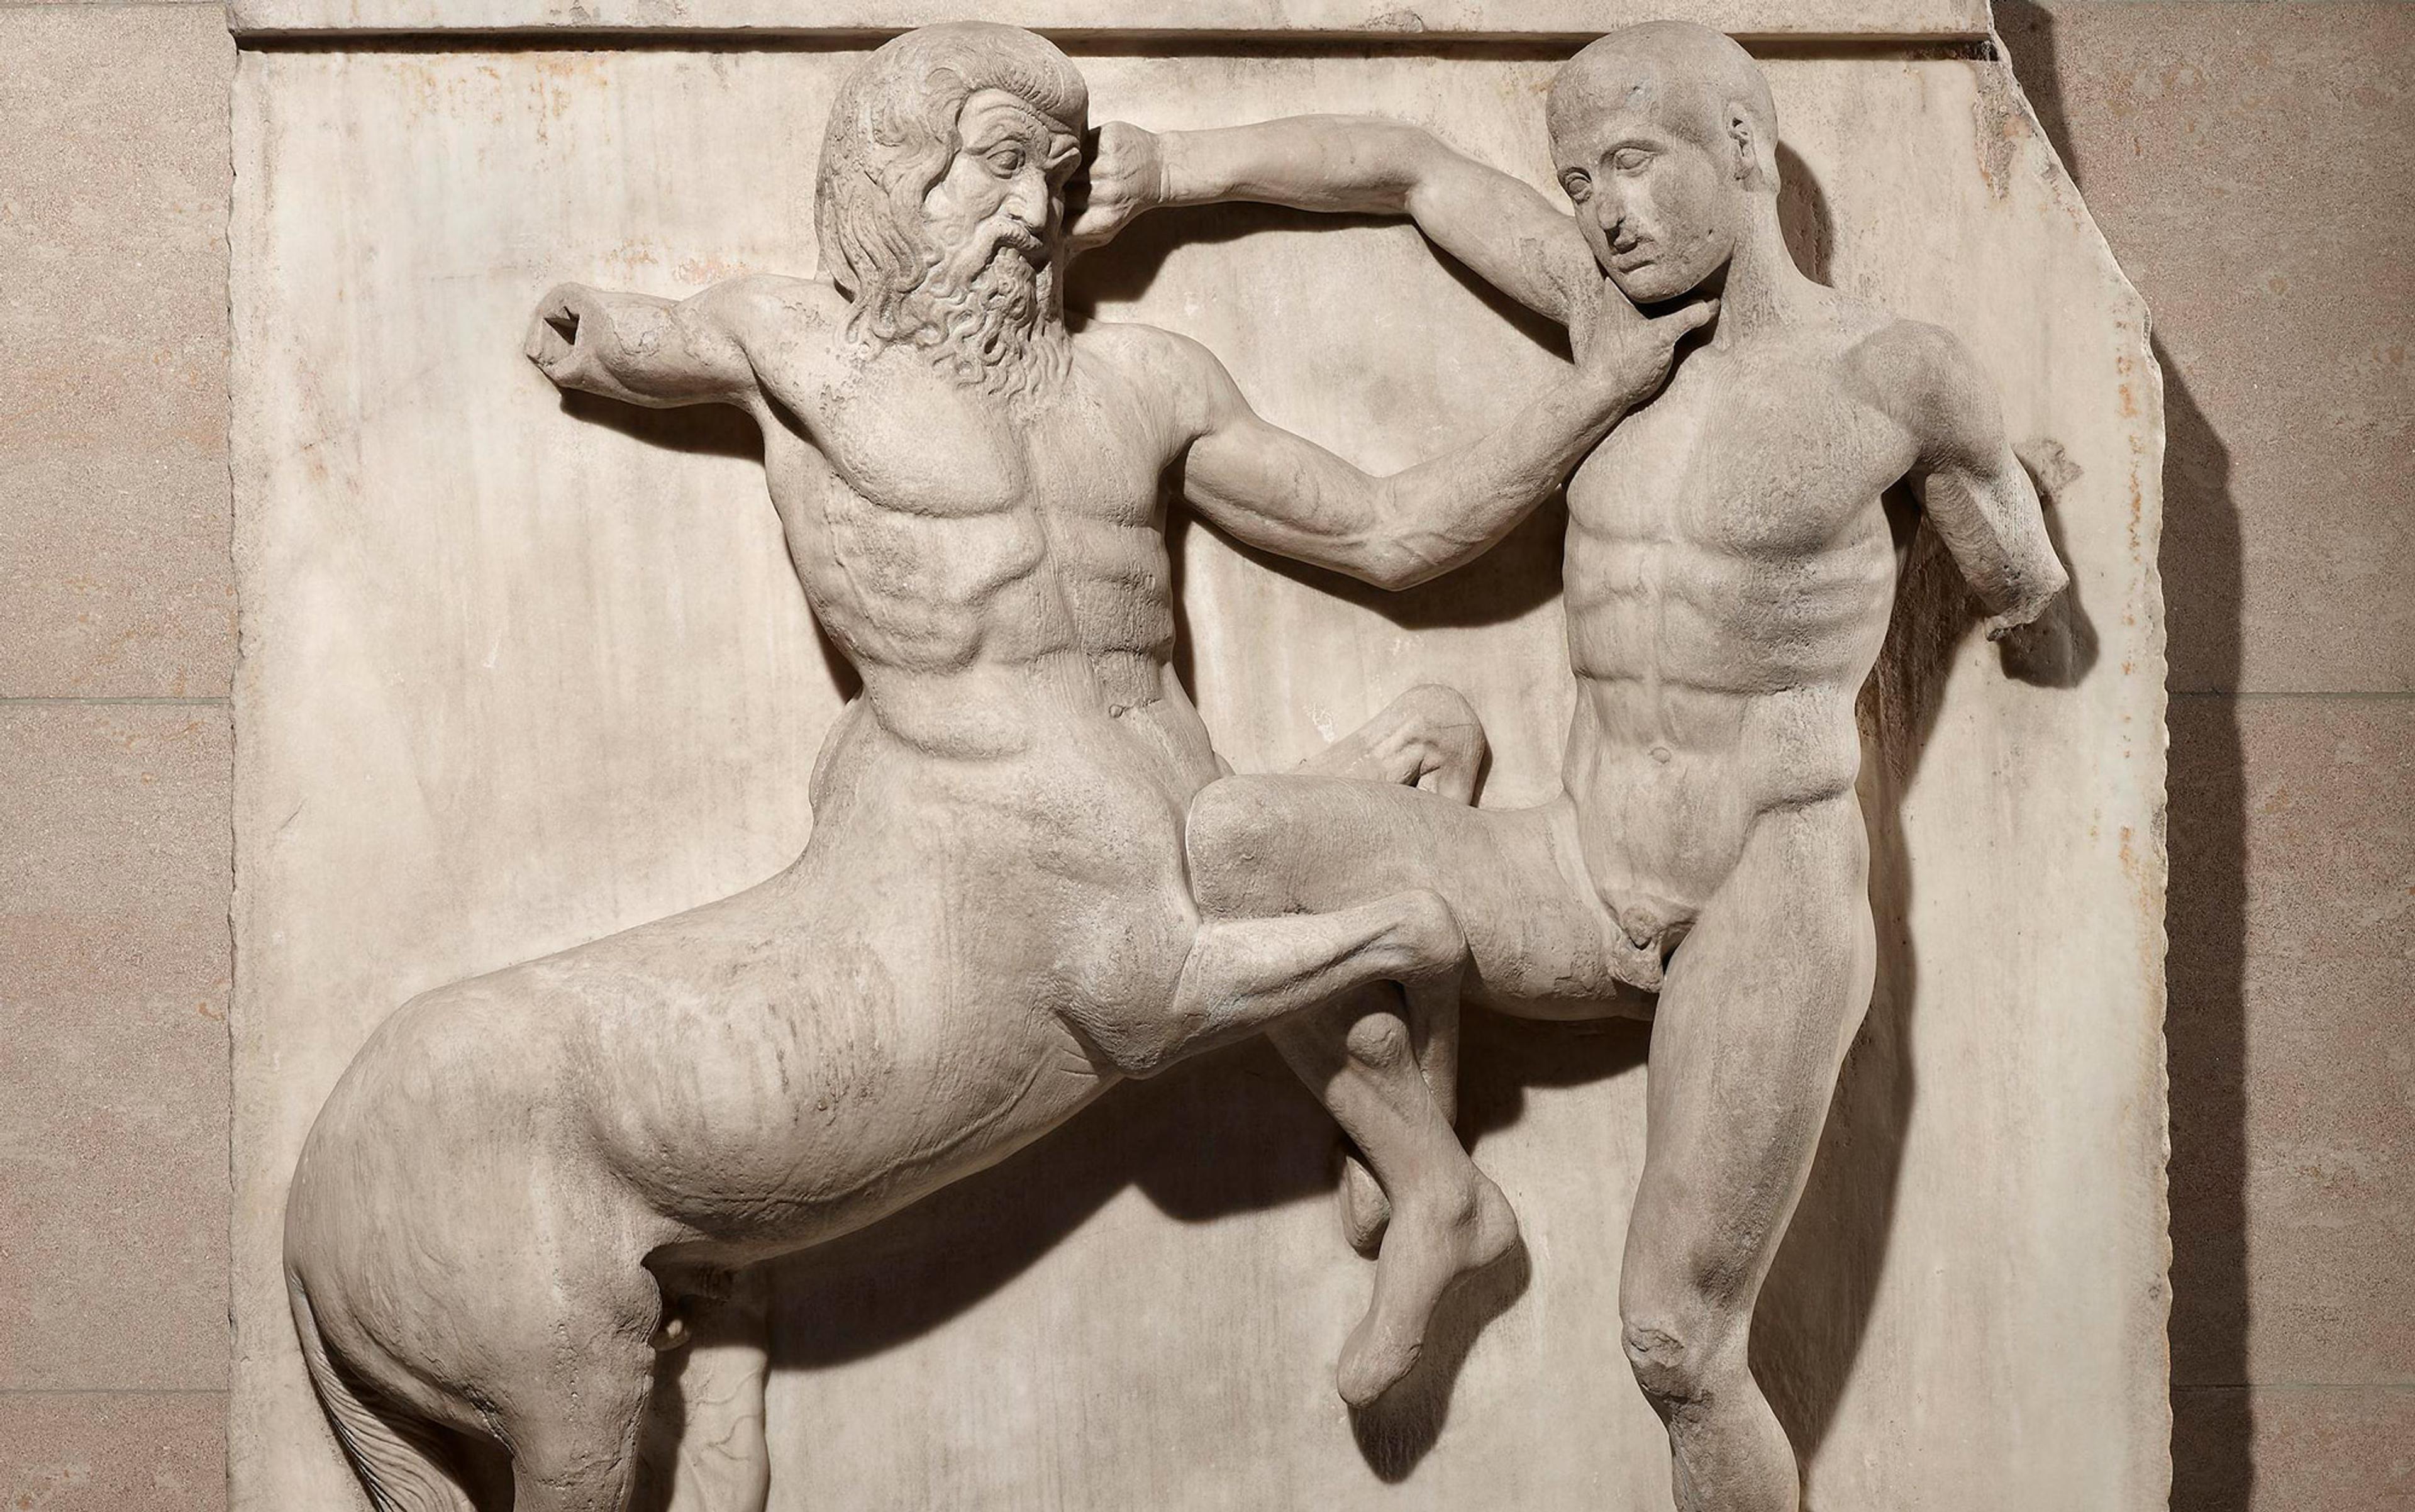 Ancient Force Xxx - Why are men seemingly always naked in ancient Greek art? | Aeon Essays